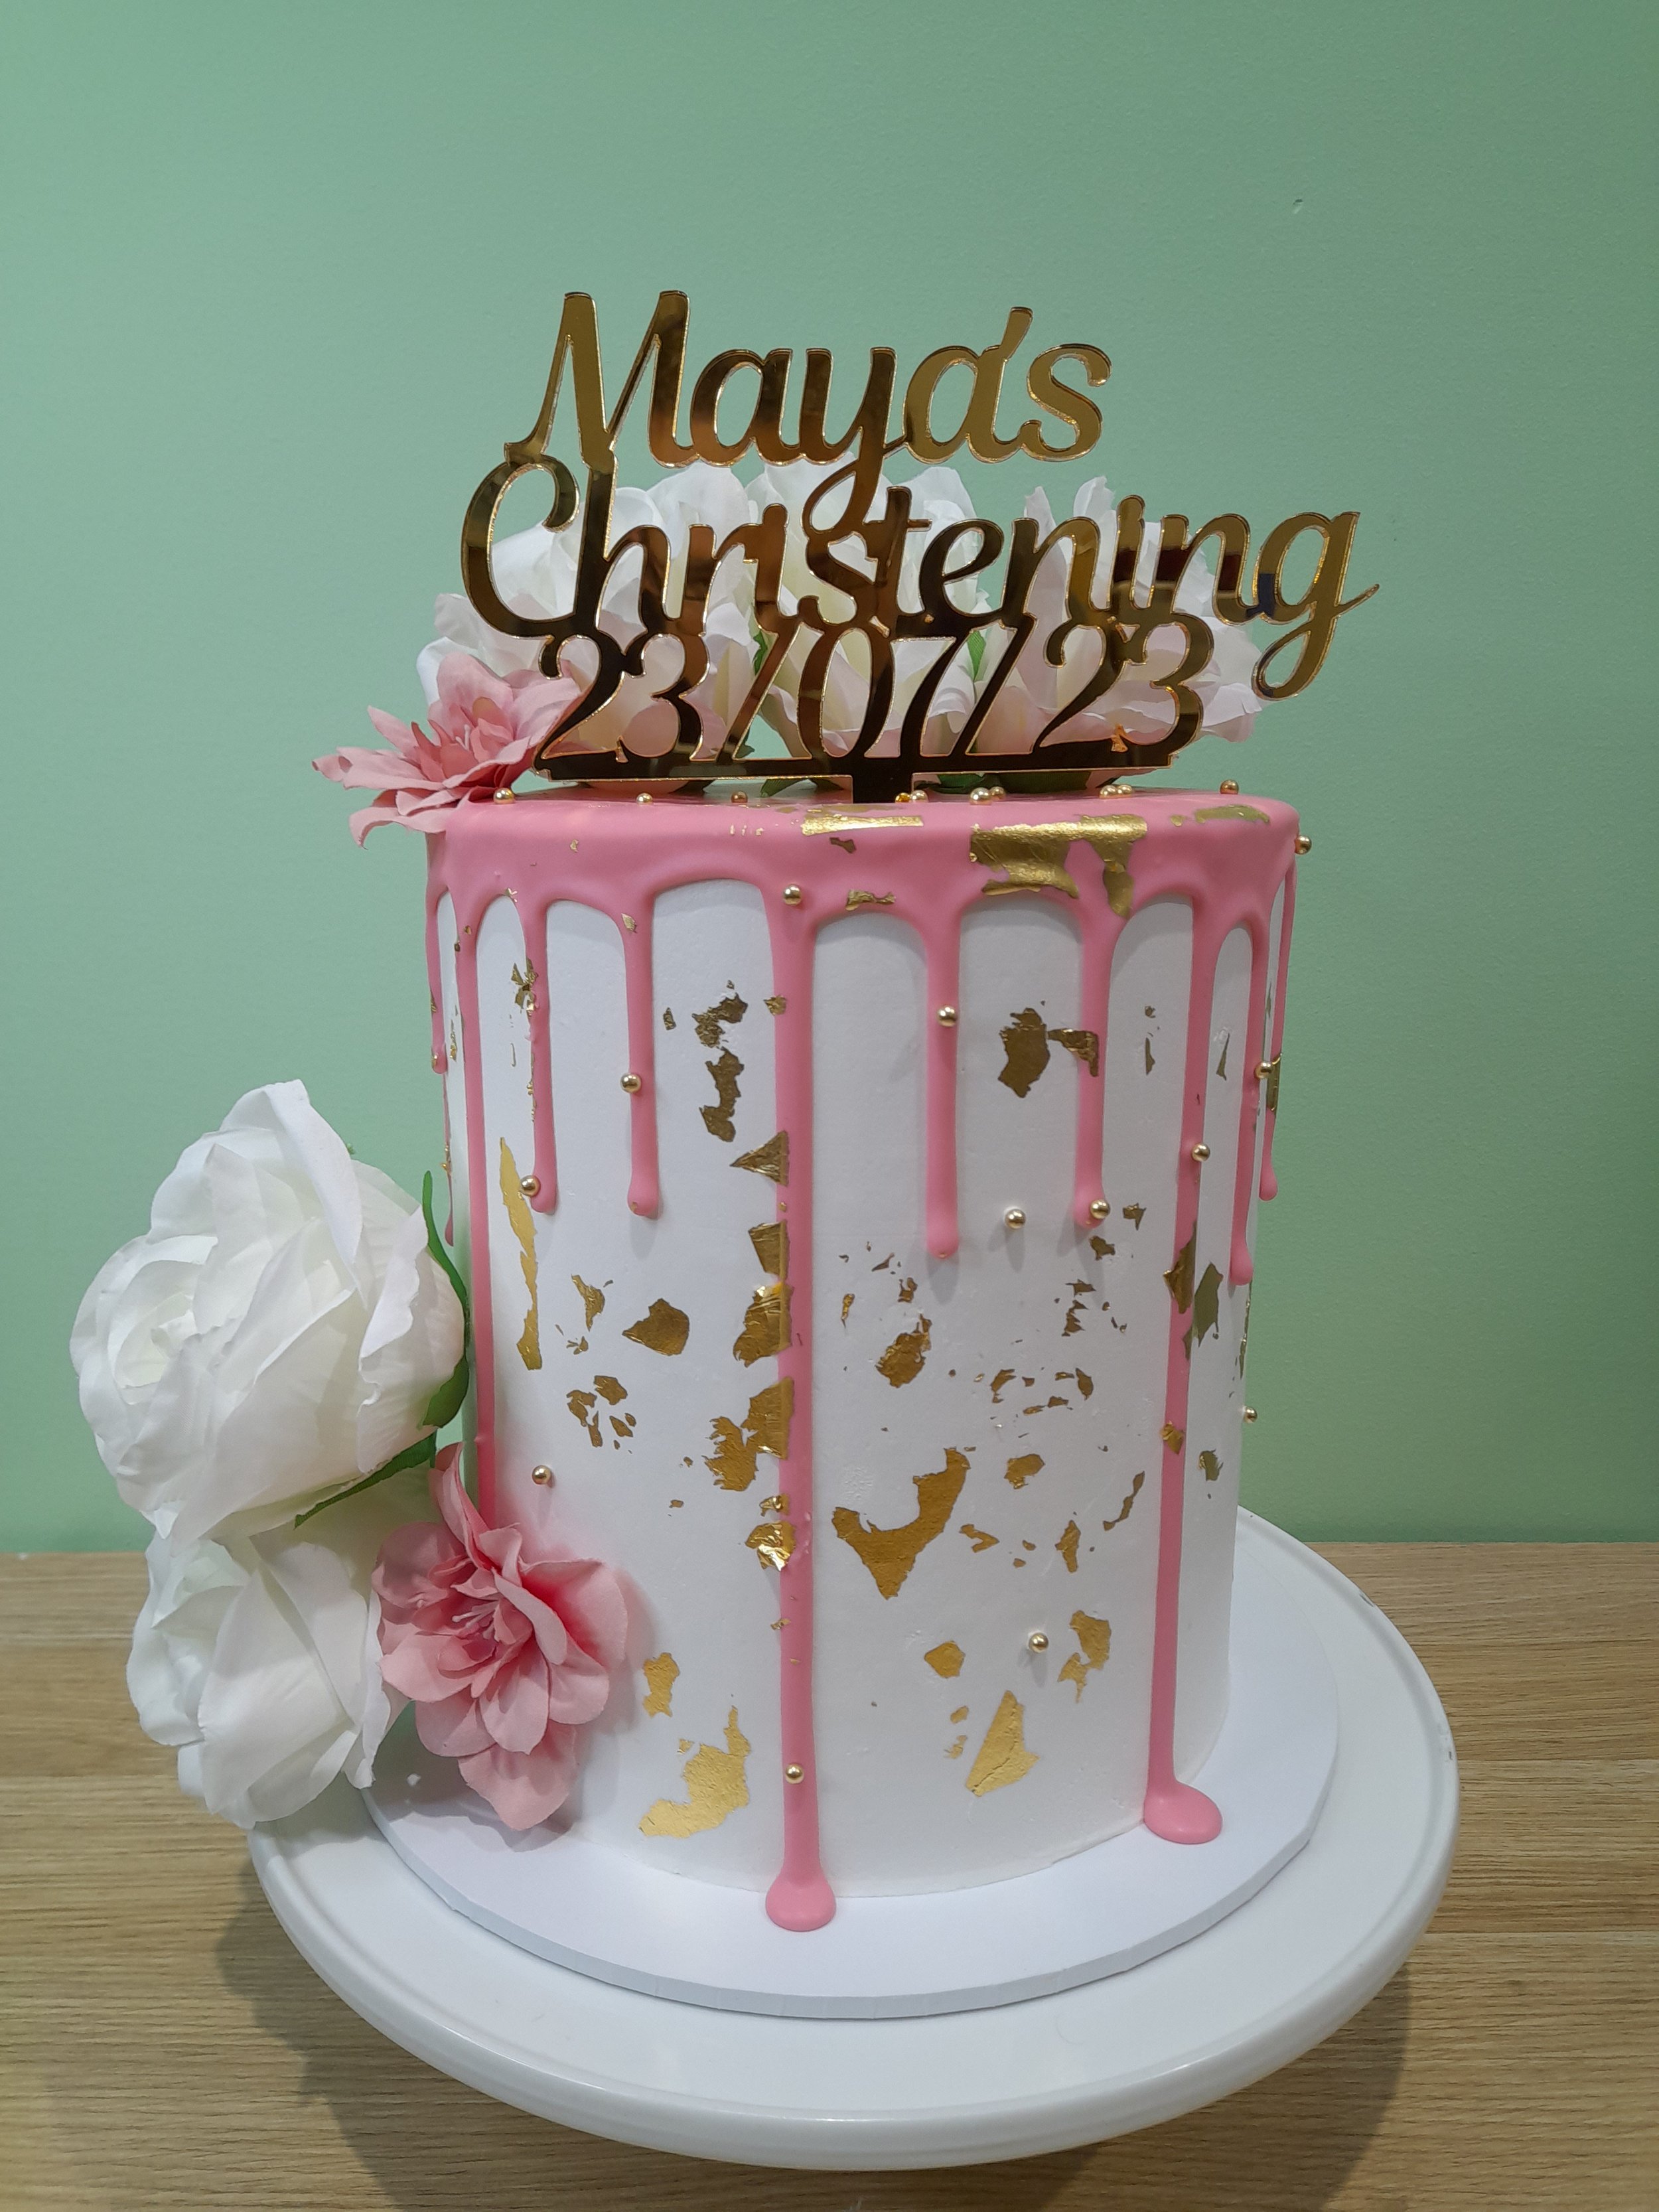 All Pink Birthday Cake - Quick and safe delivery within Melbourne